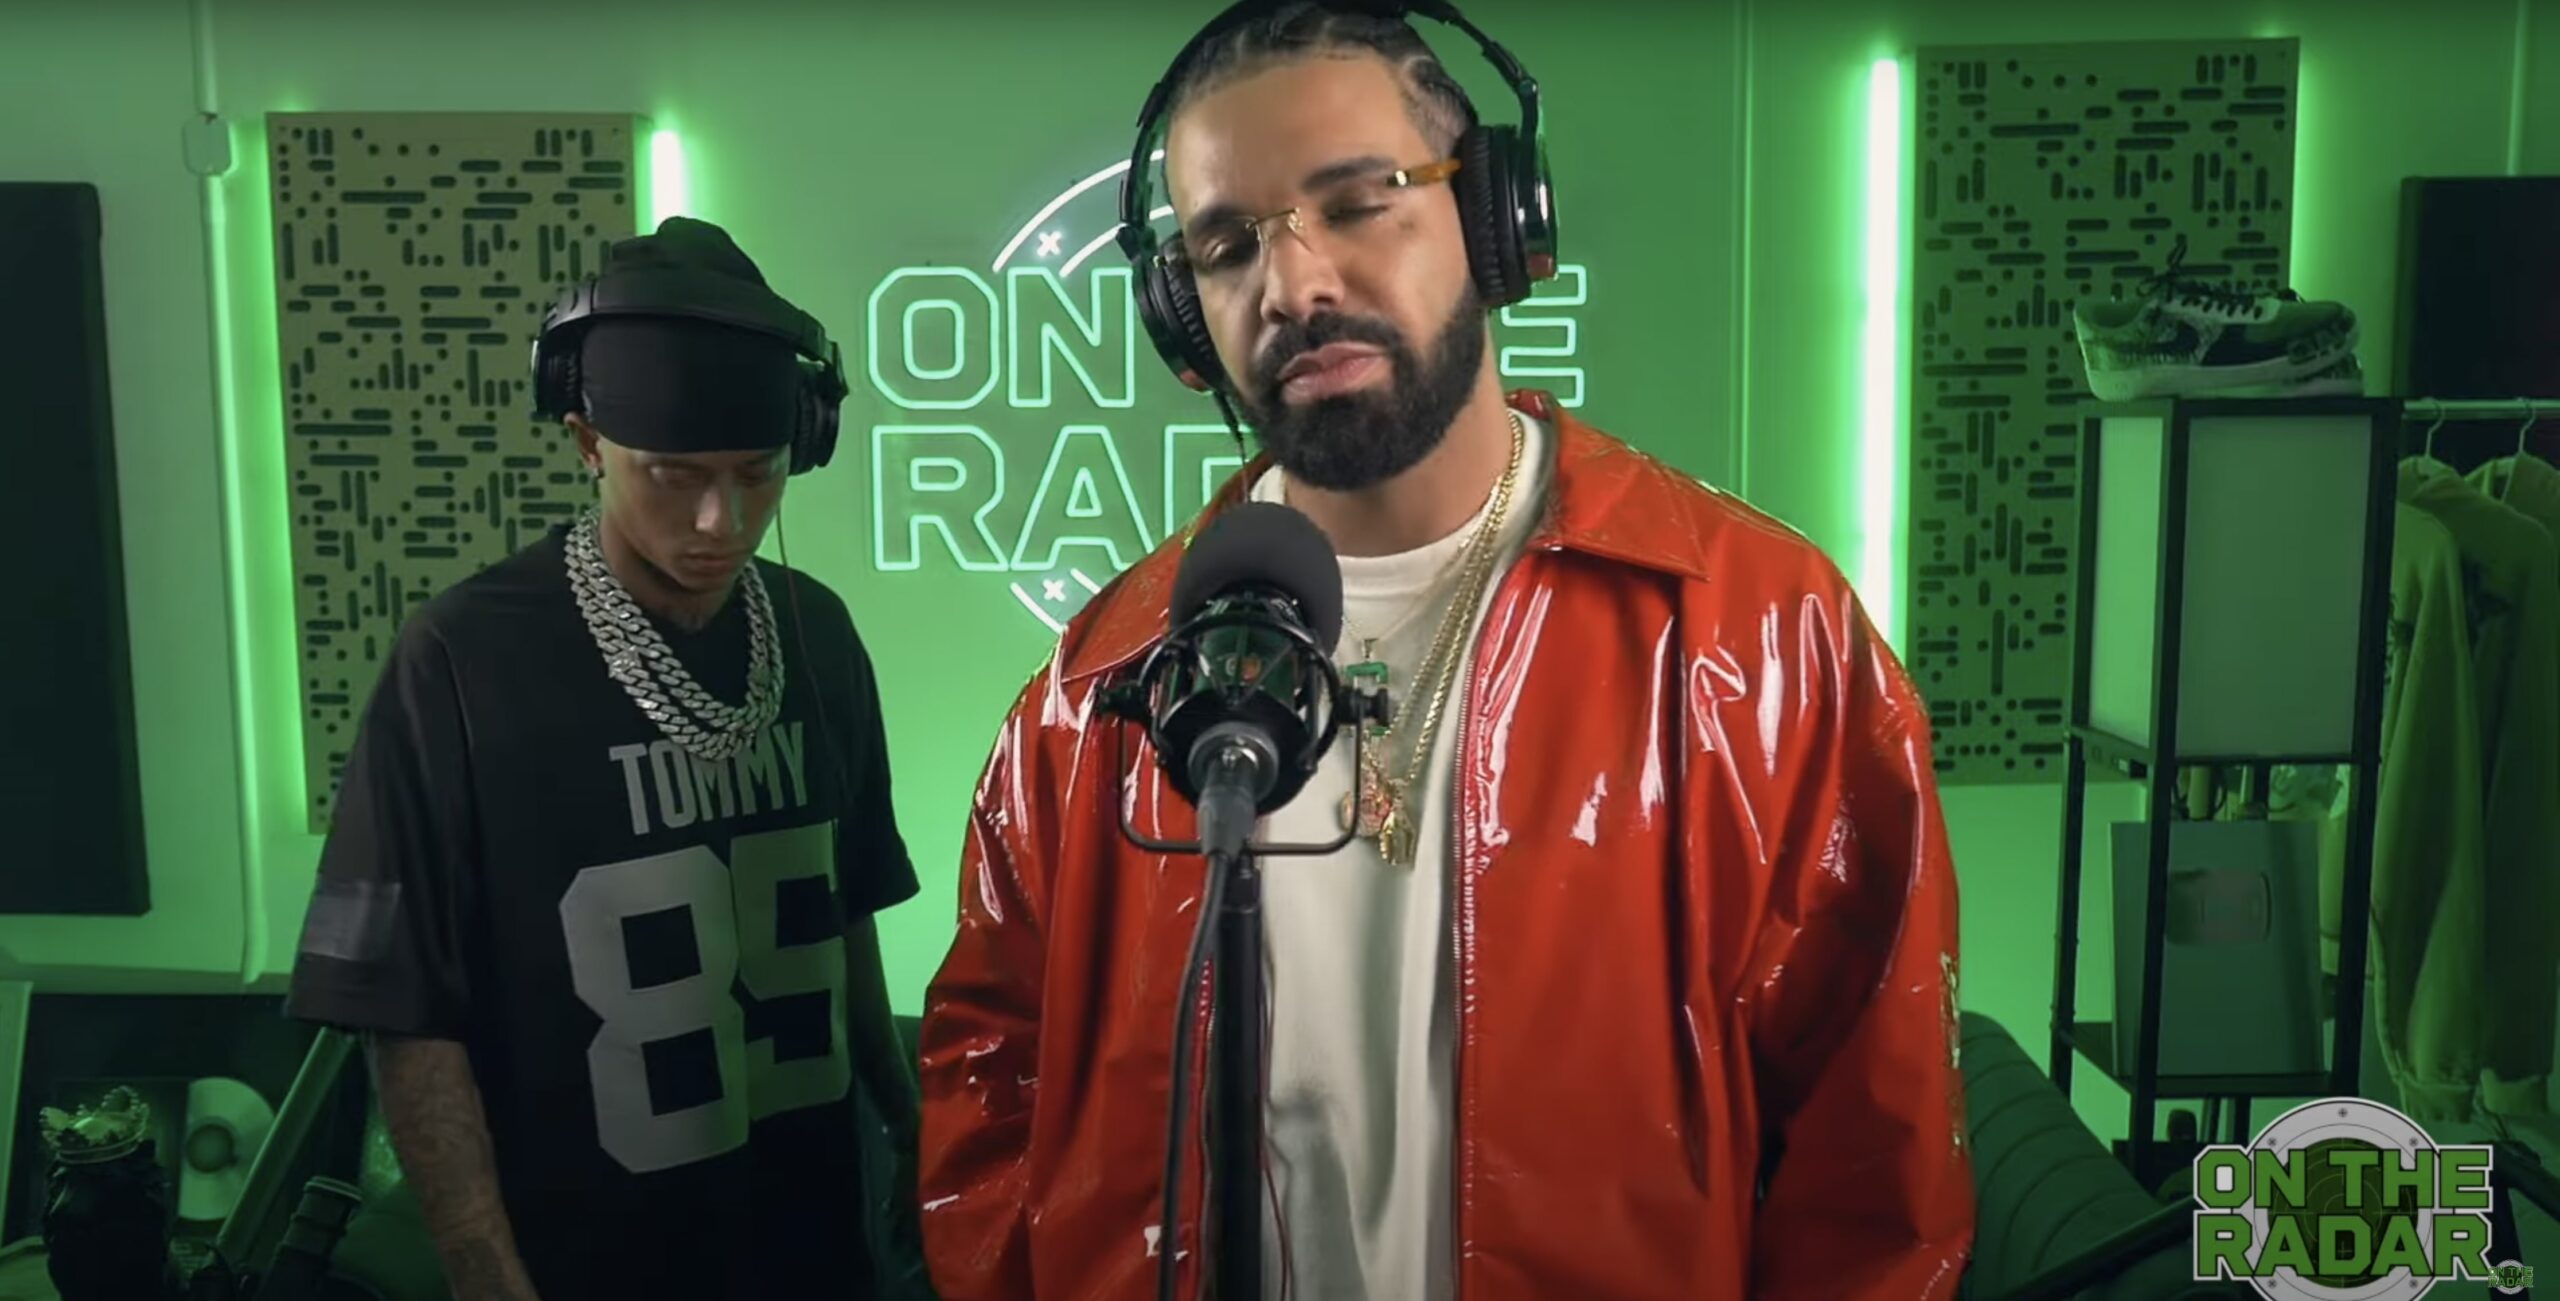 Drake & Central Cee’s “On The Radar” Freestyle Brings The Madness & Badness Together